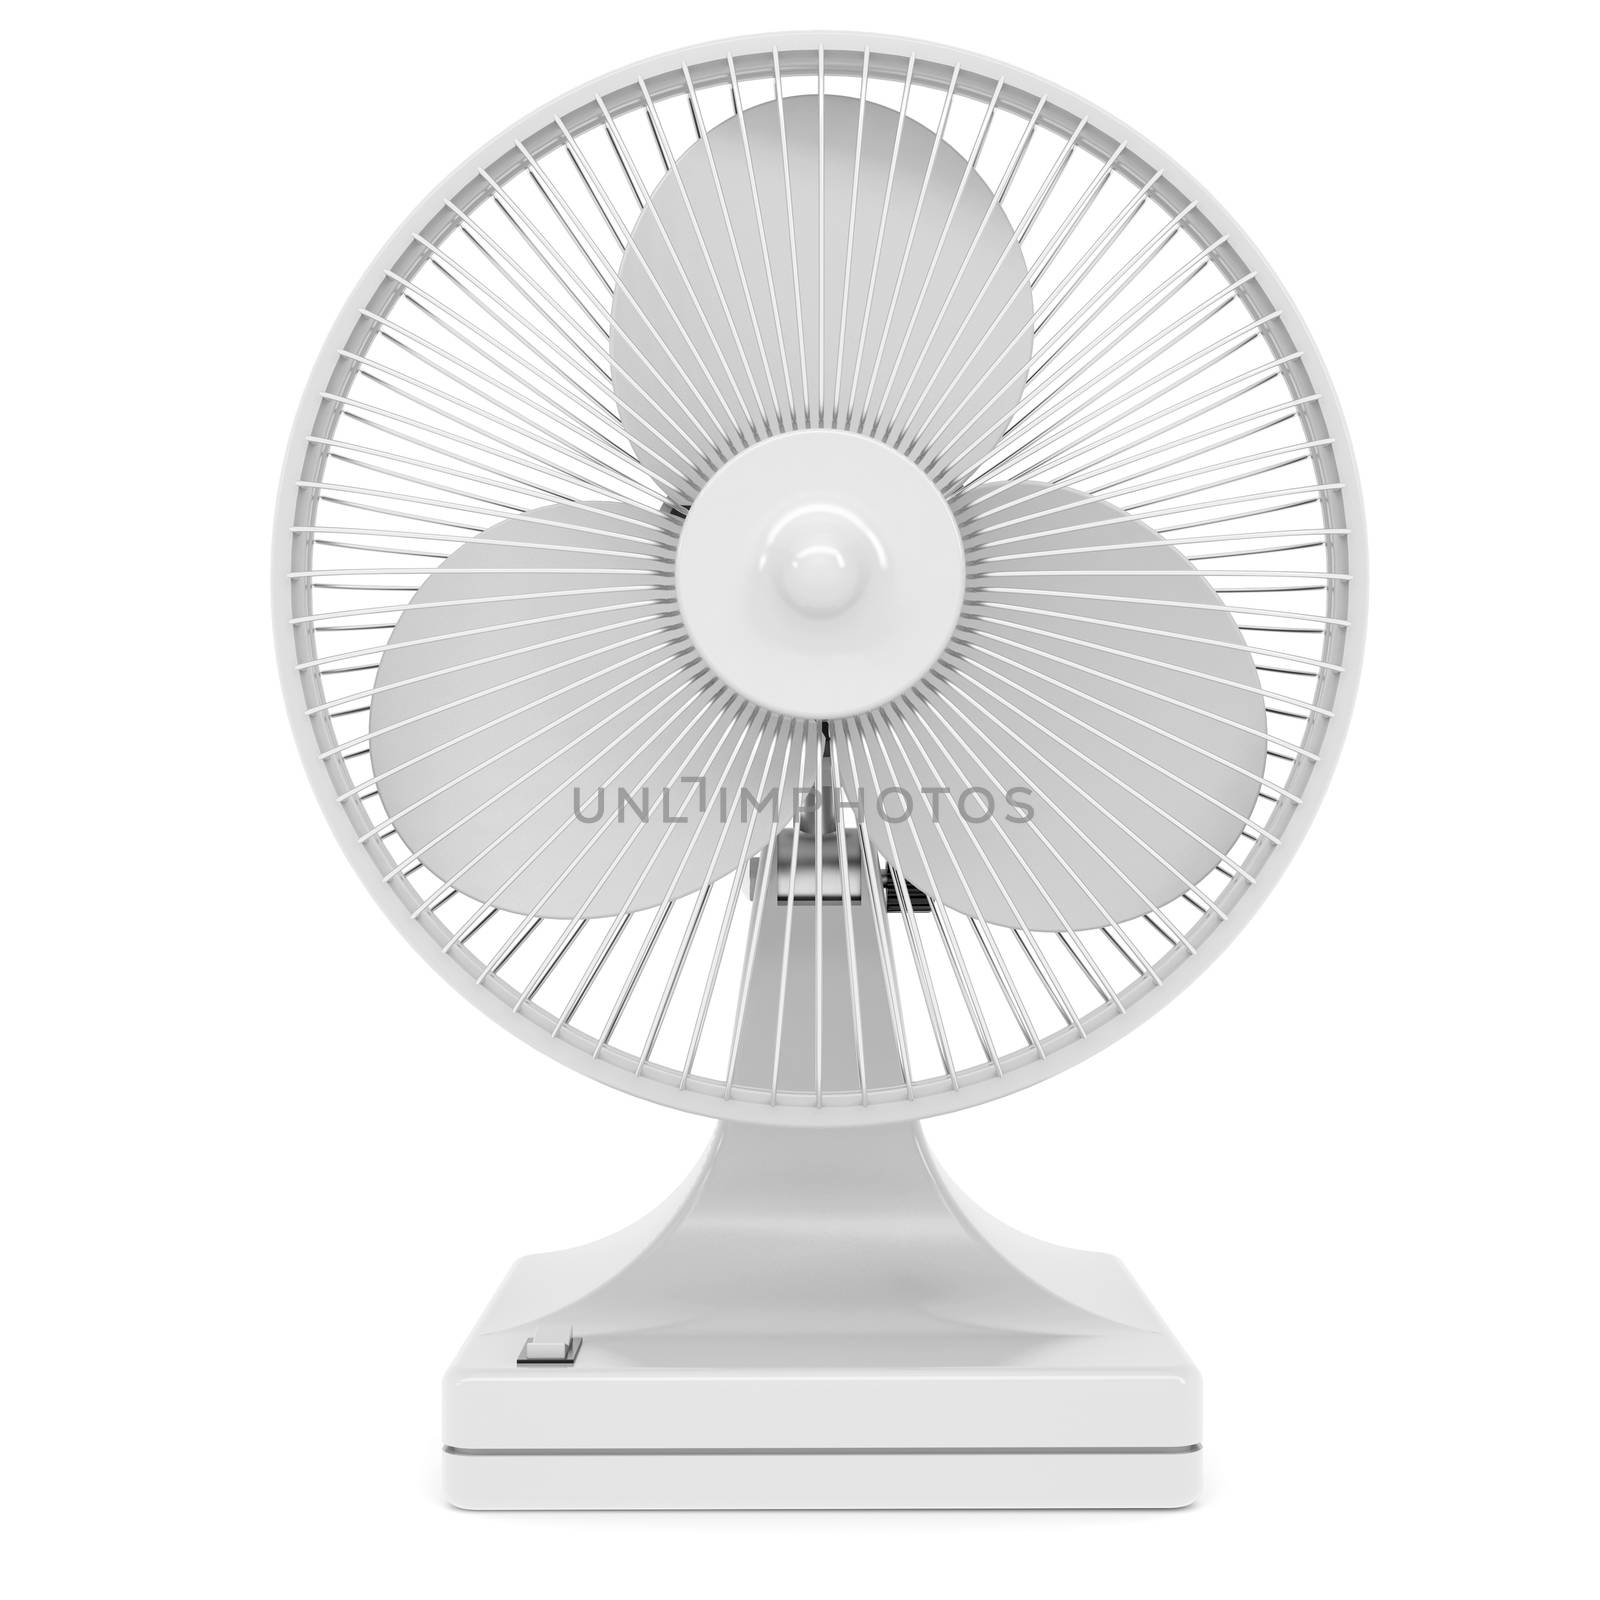 Electric fan. Isolated render on a white background